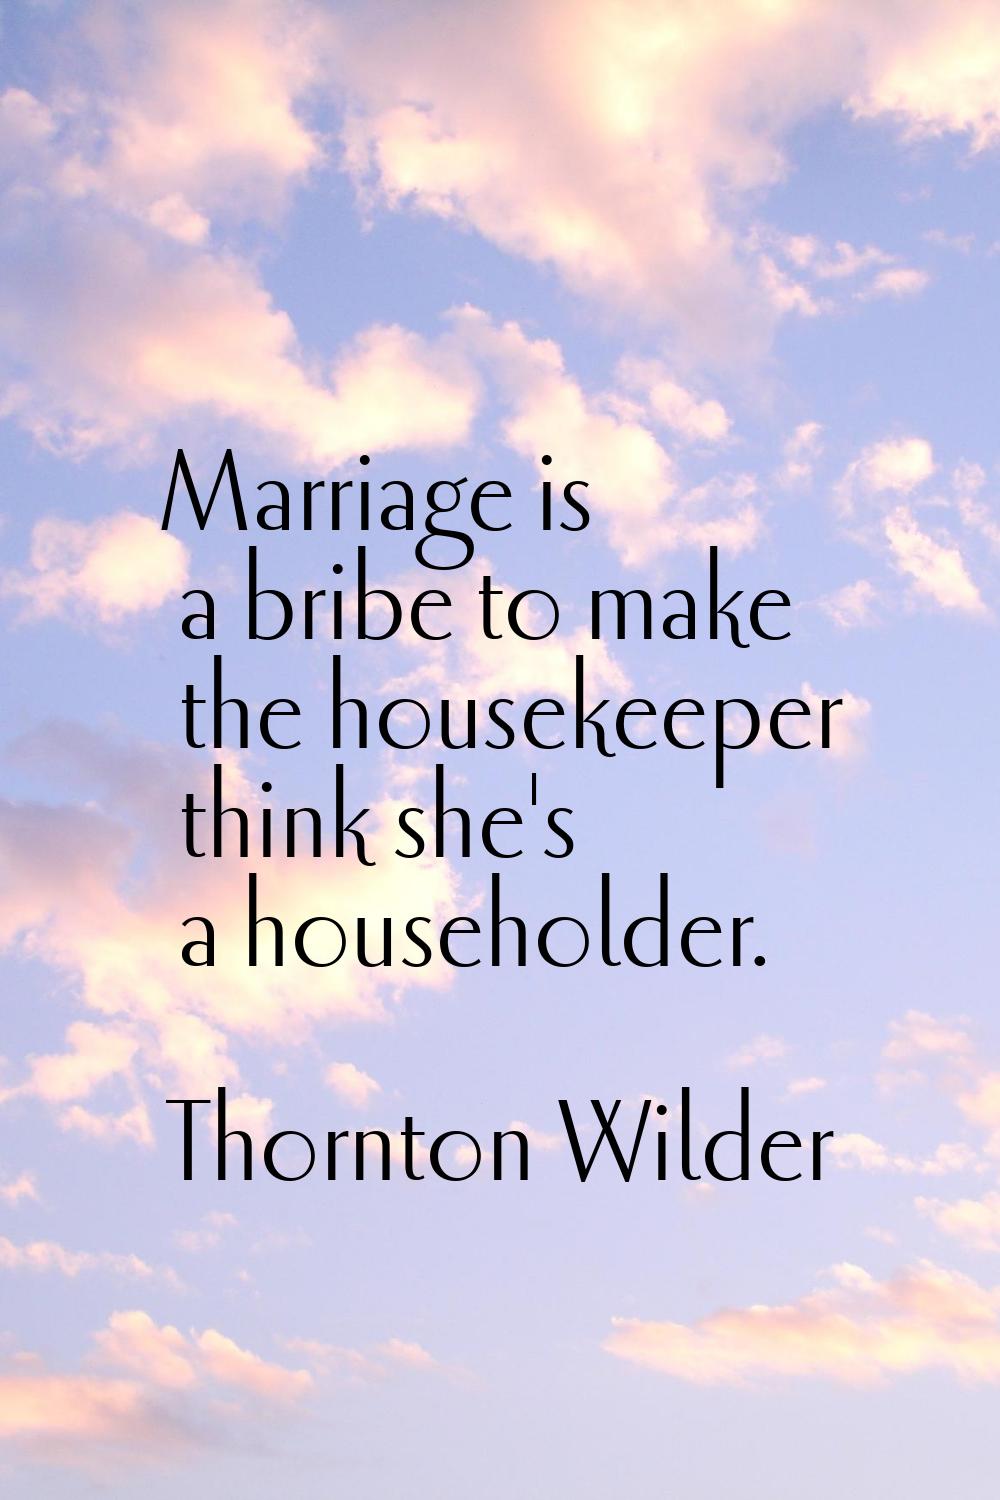 Marriage is a bribe to make the housekeeper think she's a householder.